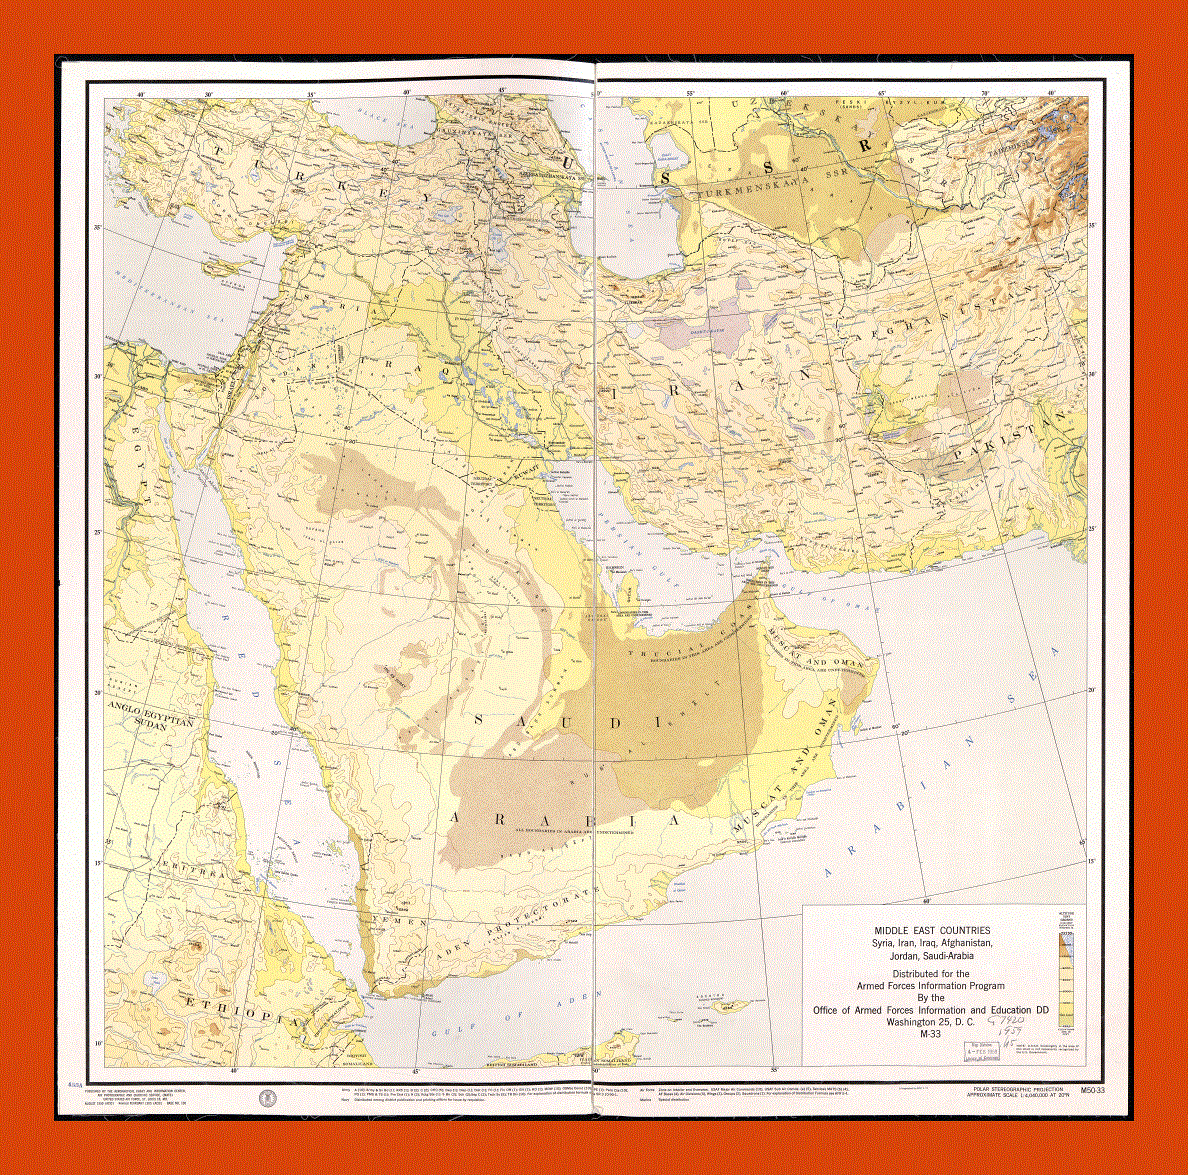 Elevation map of the Middle East Countries - Syria, Iran, Iraq, Afghanistan, Jordan and Saudi Arabia - 1955